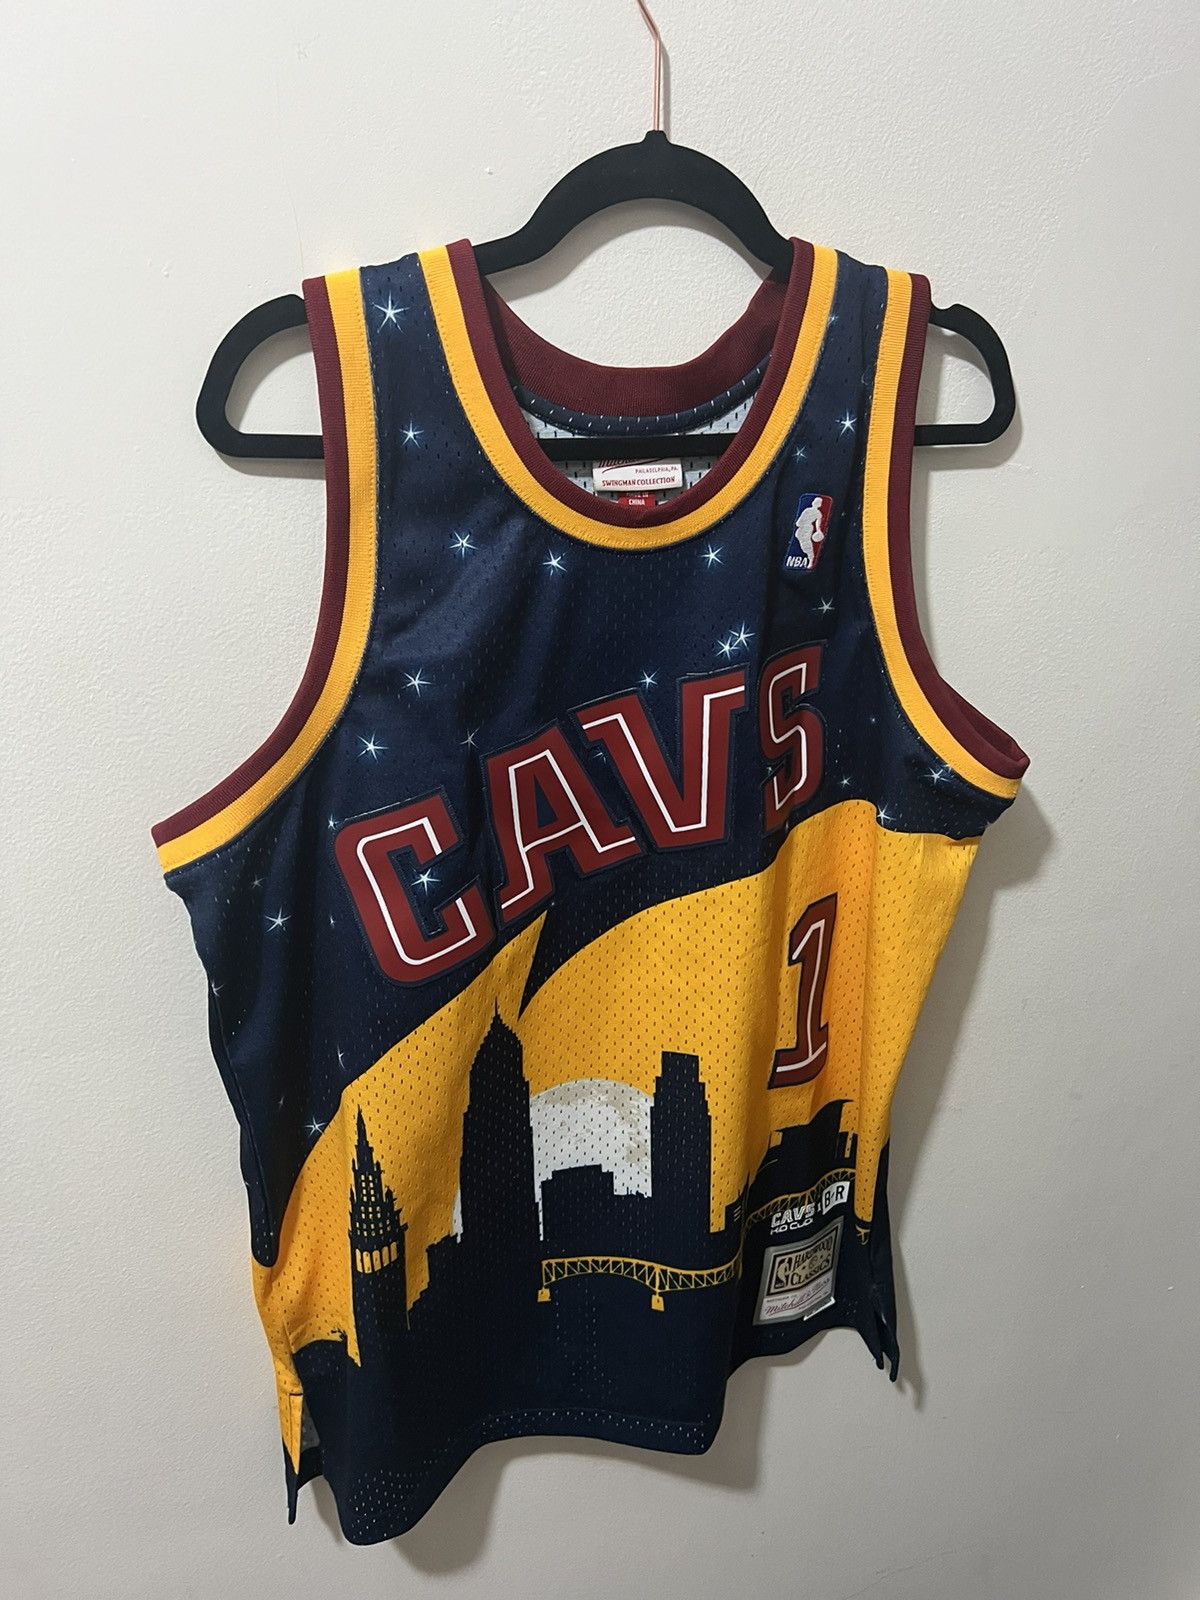 CUDI x CAVS JERSEY 🏀 This beauty just came in and I honestly